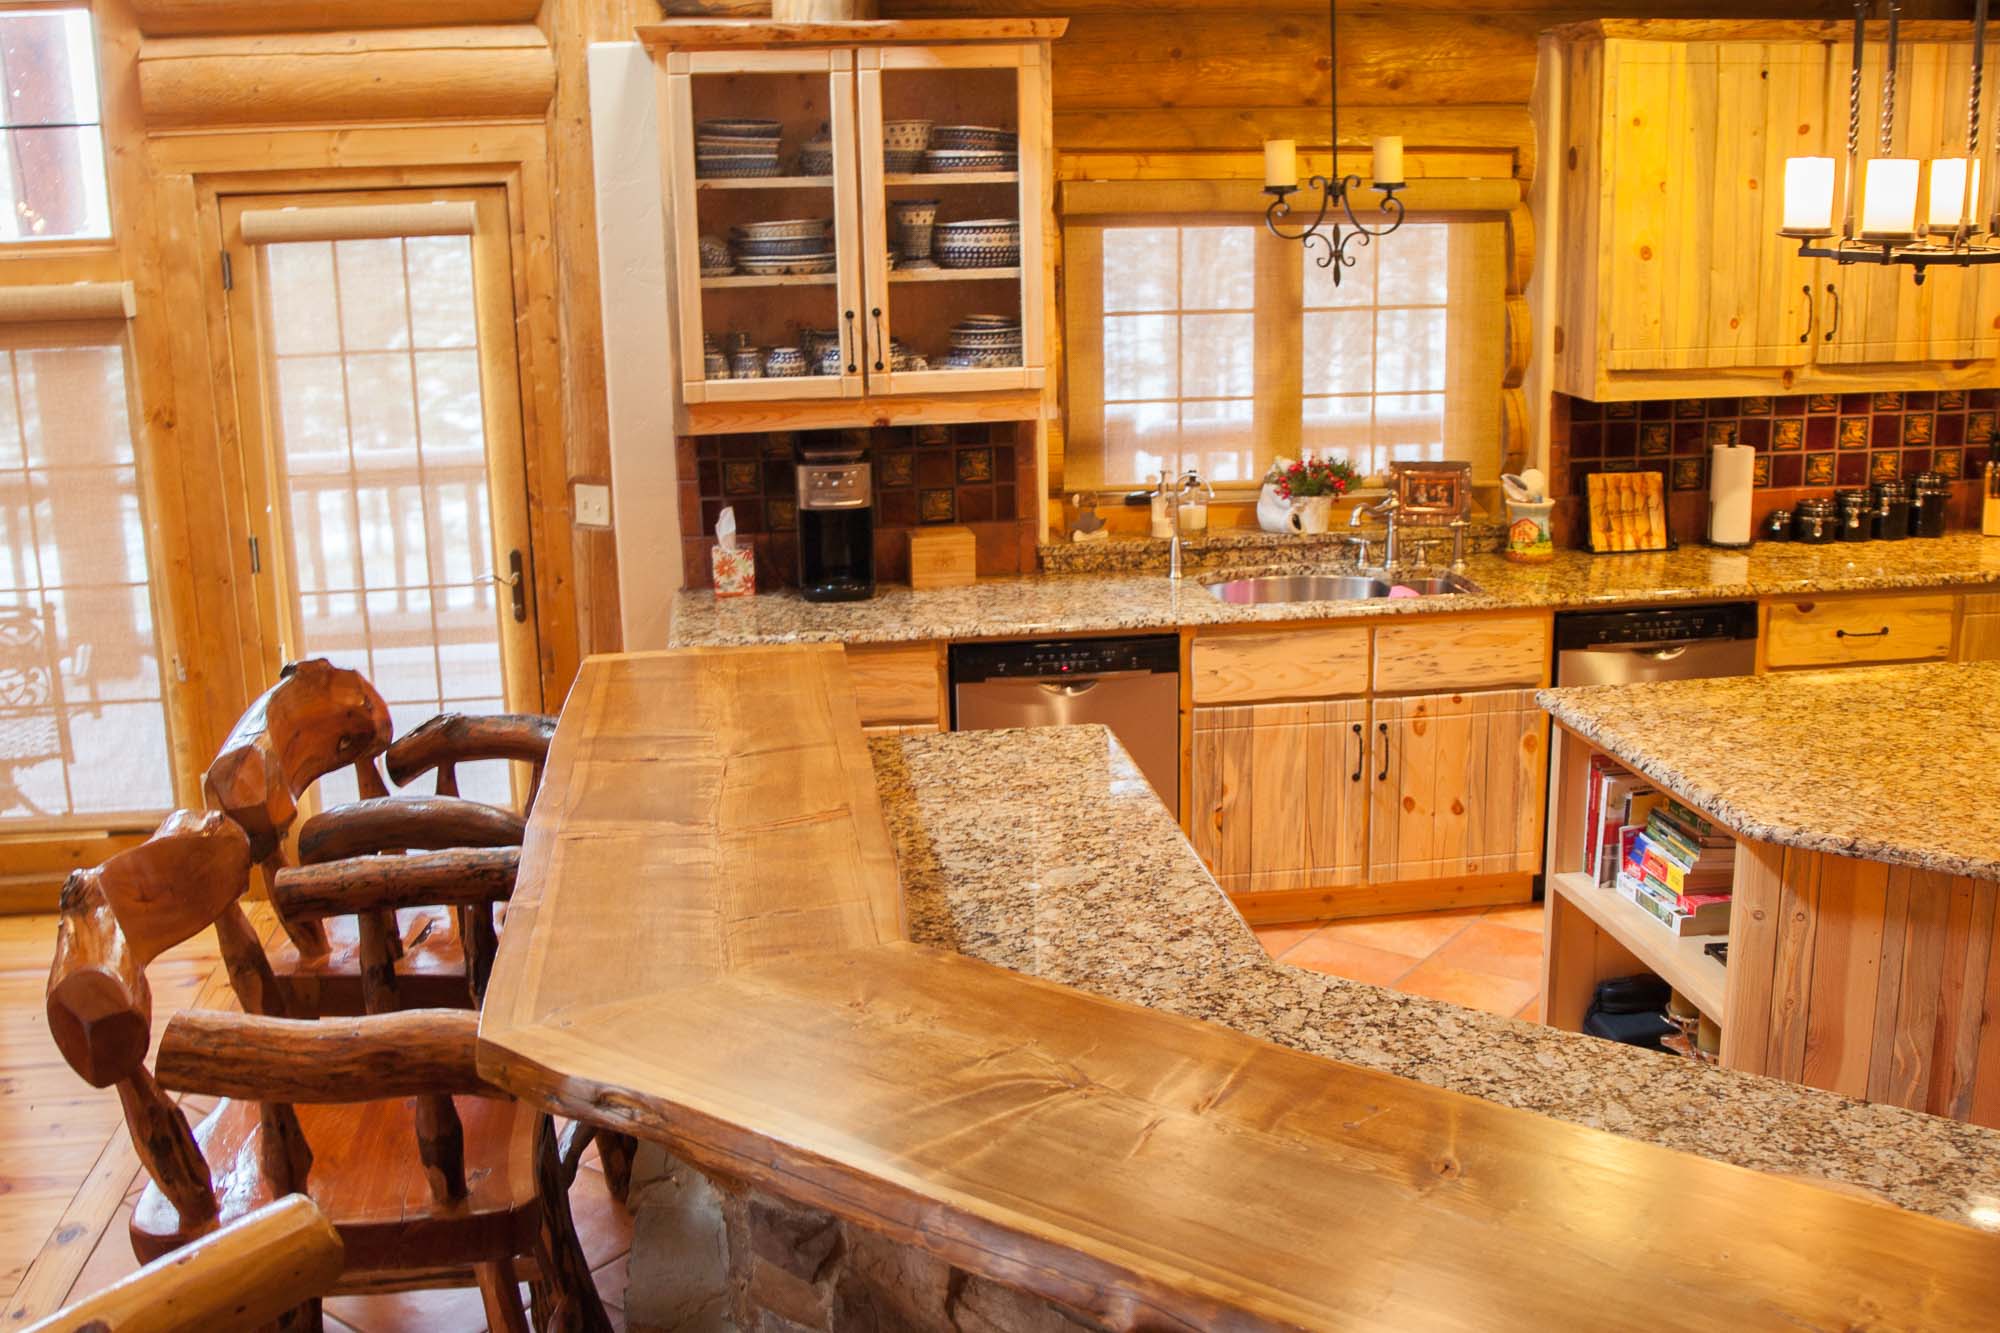 Granite Counter Tops. Custom designed & built log home kitchen in Northern New Mexico by Mammoth Mill & Construction